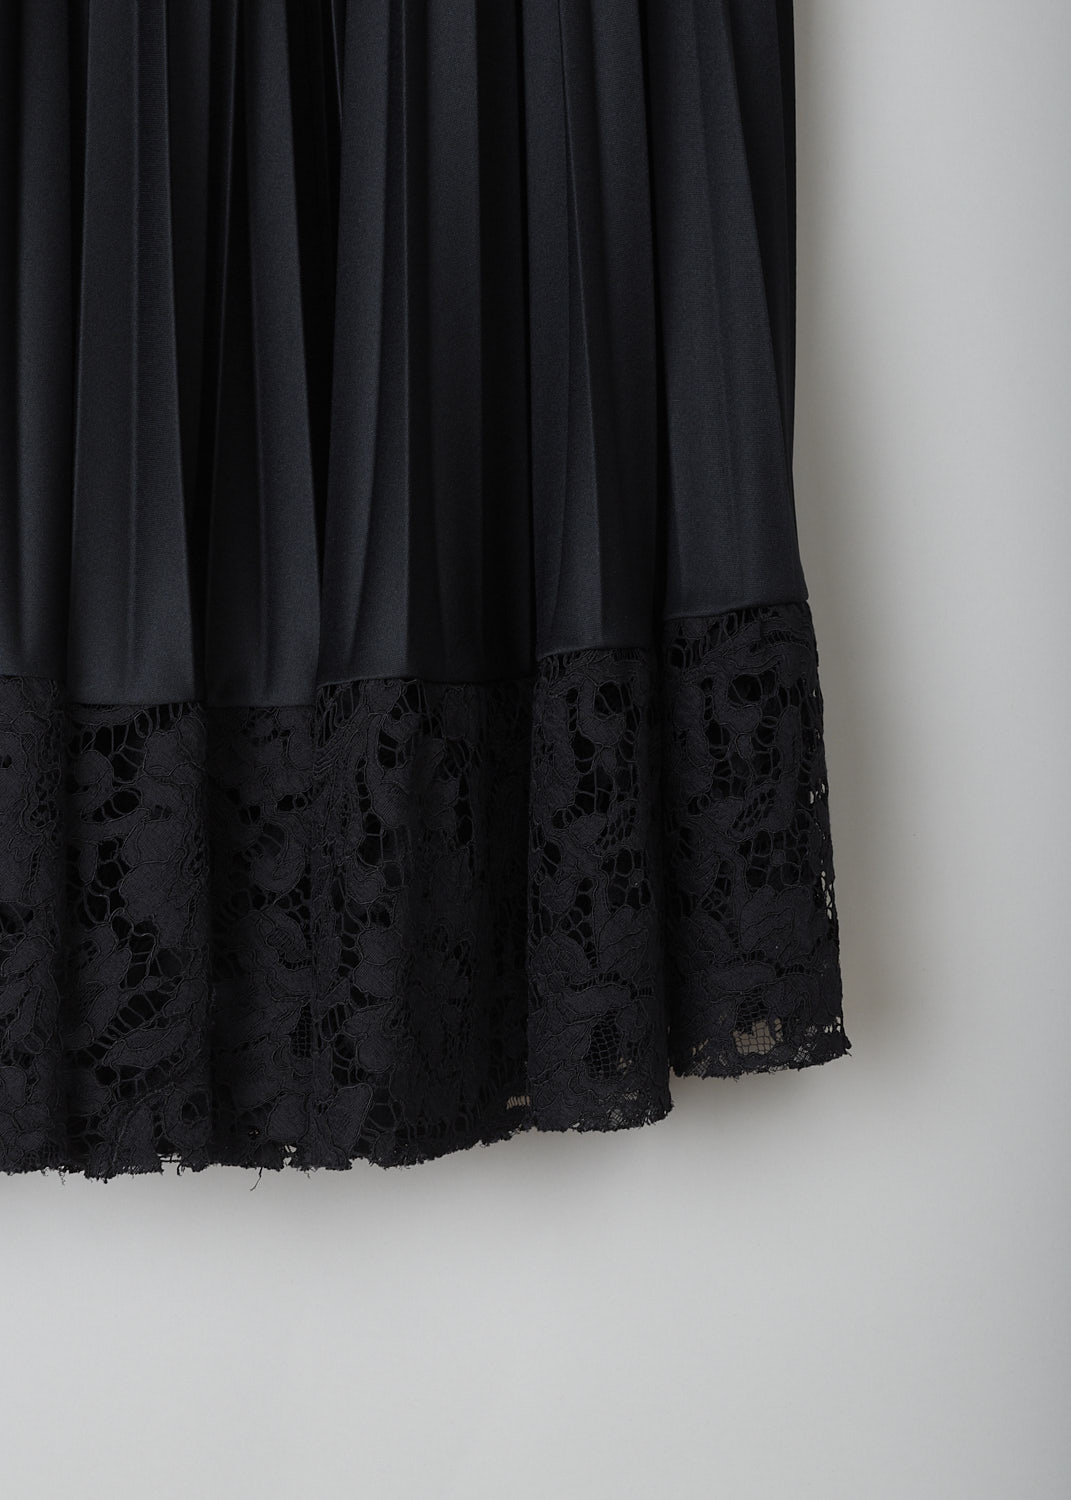 VALENTINO, BLACK PLEATED SKIRT WITH LACE TRIM, TB3MD01H575_0N0, Black, Detail, This black pleated skirt has a partly elasticated waistband with the brand's logo on it to one side. The skirt has a below-the-knee length. The straight hemline has a broad black lace trim.   
